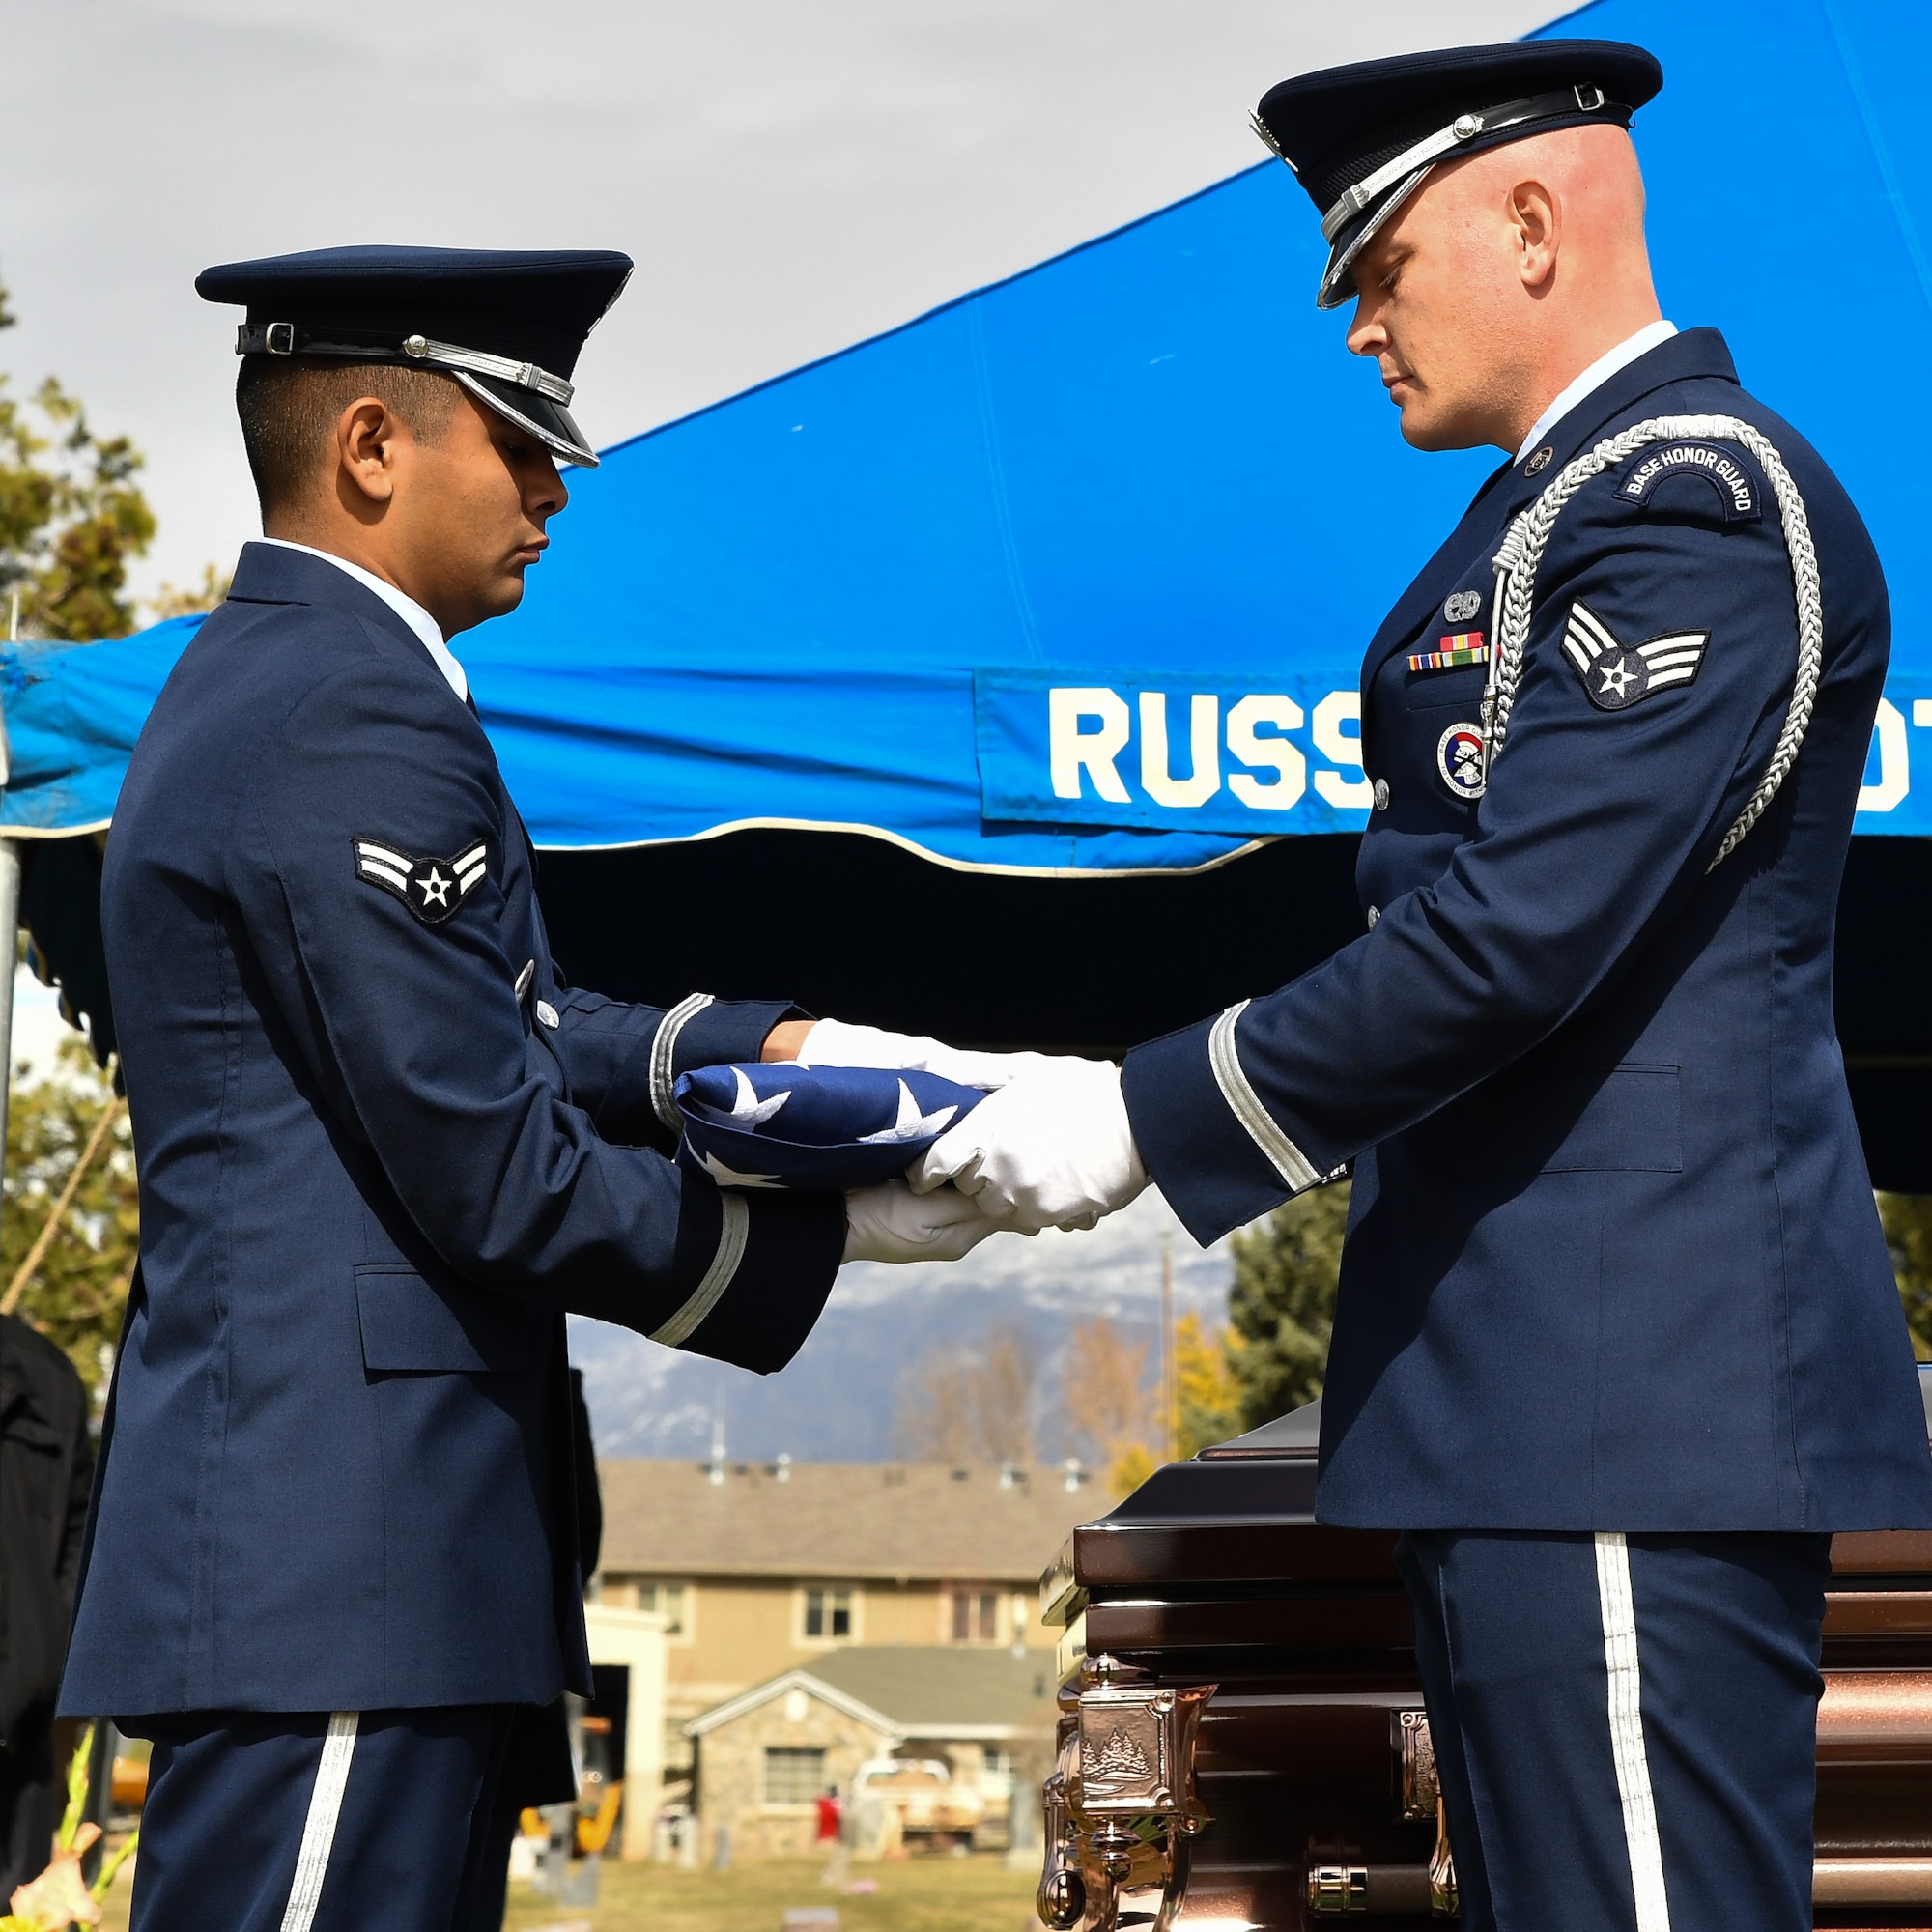 Hill AFB Honor Guard members Airman 1st Class Santos Vargas and Senior Airman James Fahrner complete a two-person flag fold during a veteran’s graveside service, Bountiful, Utah, March 8, 2017. Two-person flag folds are conducted during funerals, retirements and Retreat ceremonies. (U.S. Air Force photo/R. Nial Bradshaw)